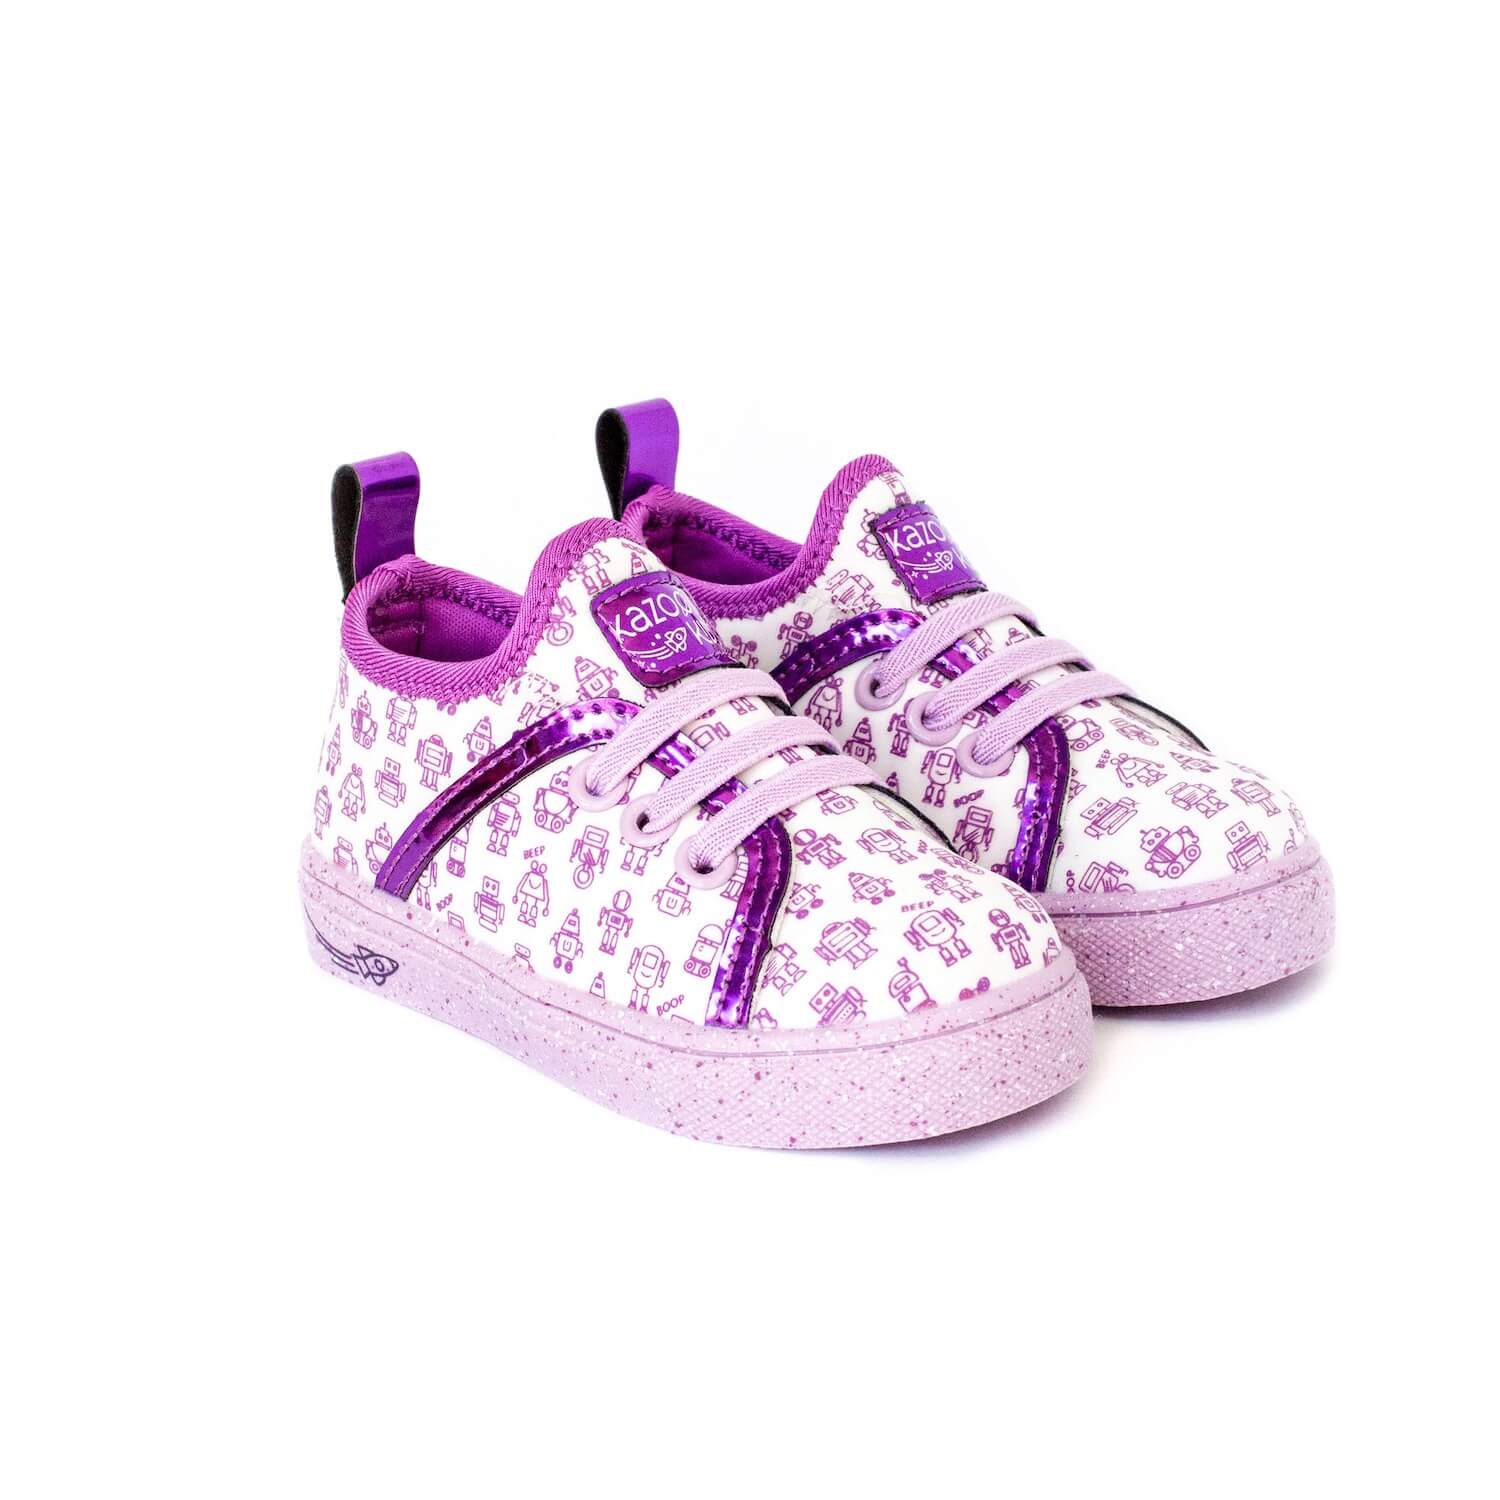 Girls Purple and white Robot youth shoes with purple iridescent stripes and no tie laces in toddler, kids and youth sizes